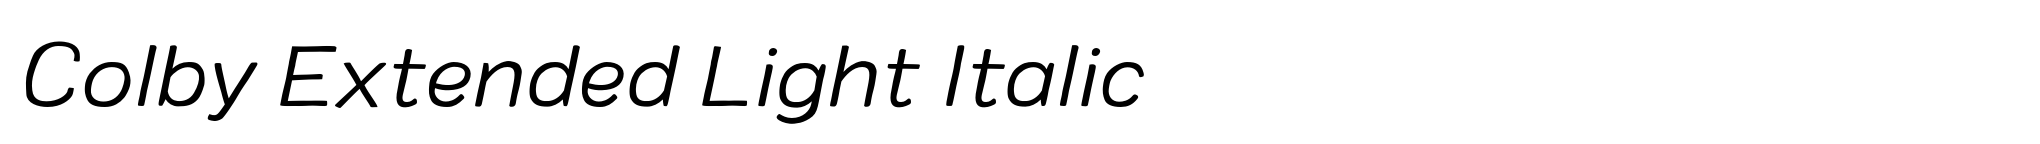 Colby Extended Light Italic image